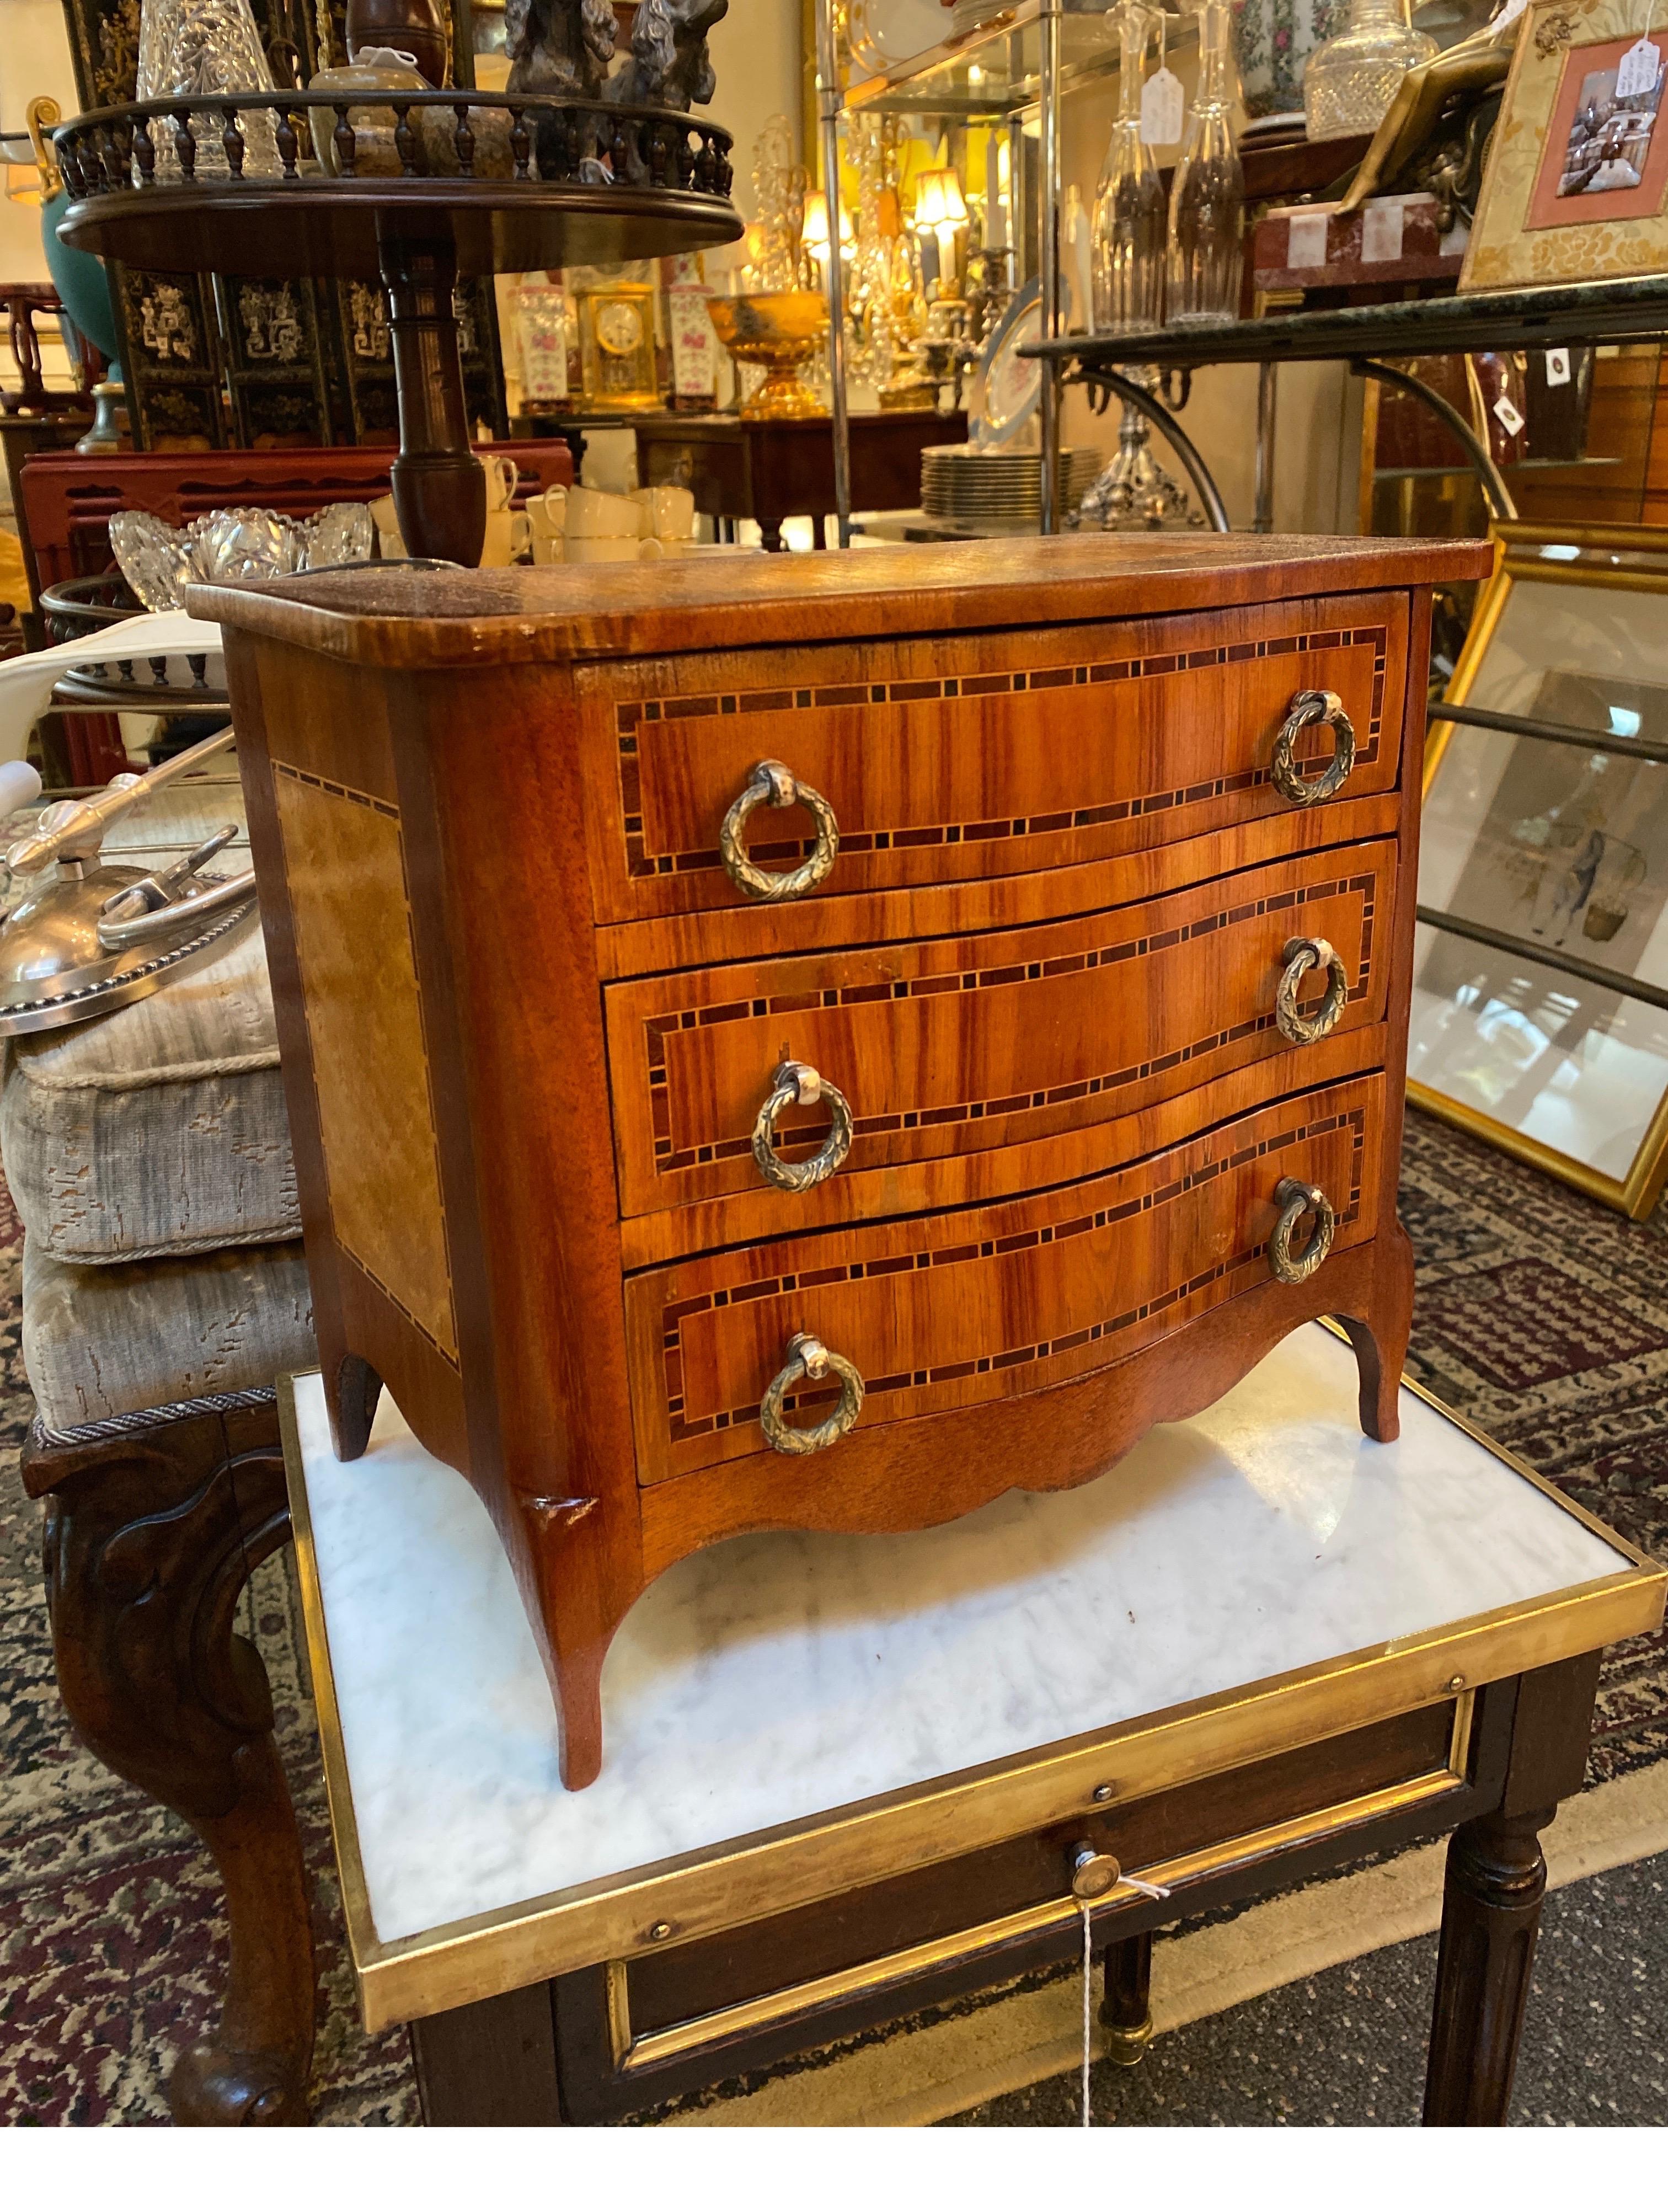 A beautifully made fully functional miniature chest of drawers. This three-drawer chest of mahogany with inlaid panels of satinwood and pencil inlay. Only 11 inches tall, this chest is a table top version of a standard cast with cast brass handles